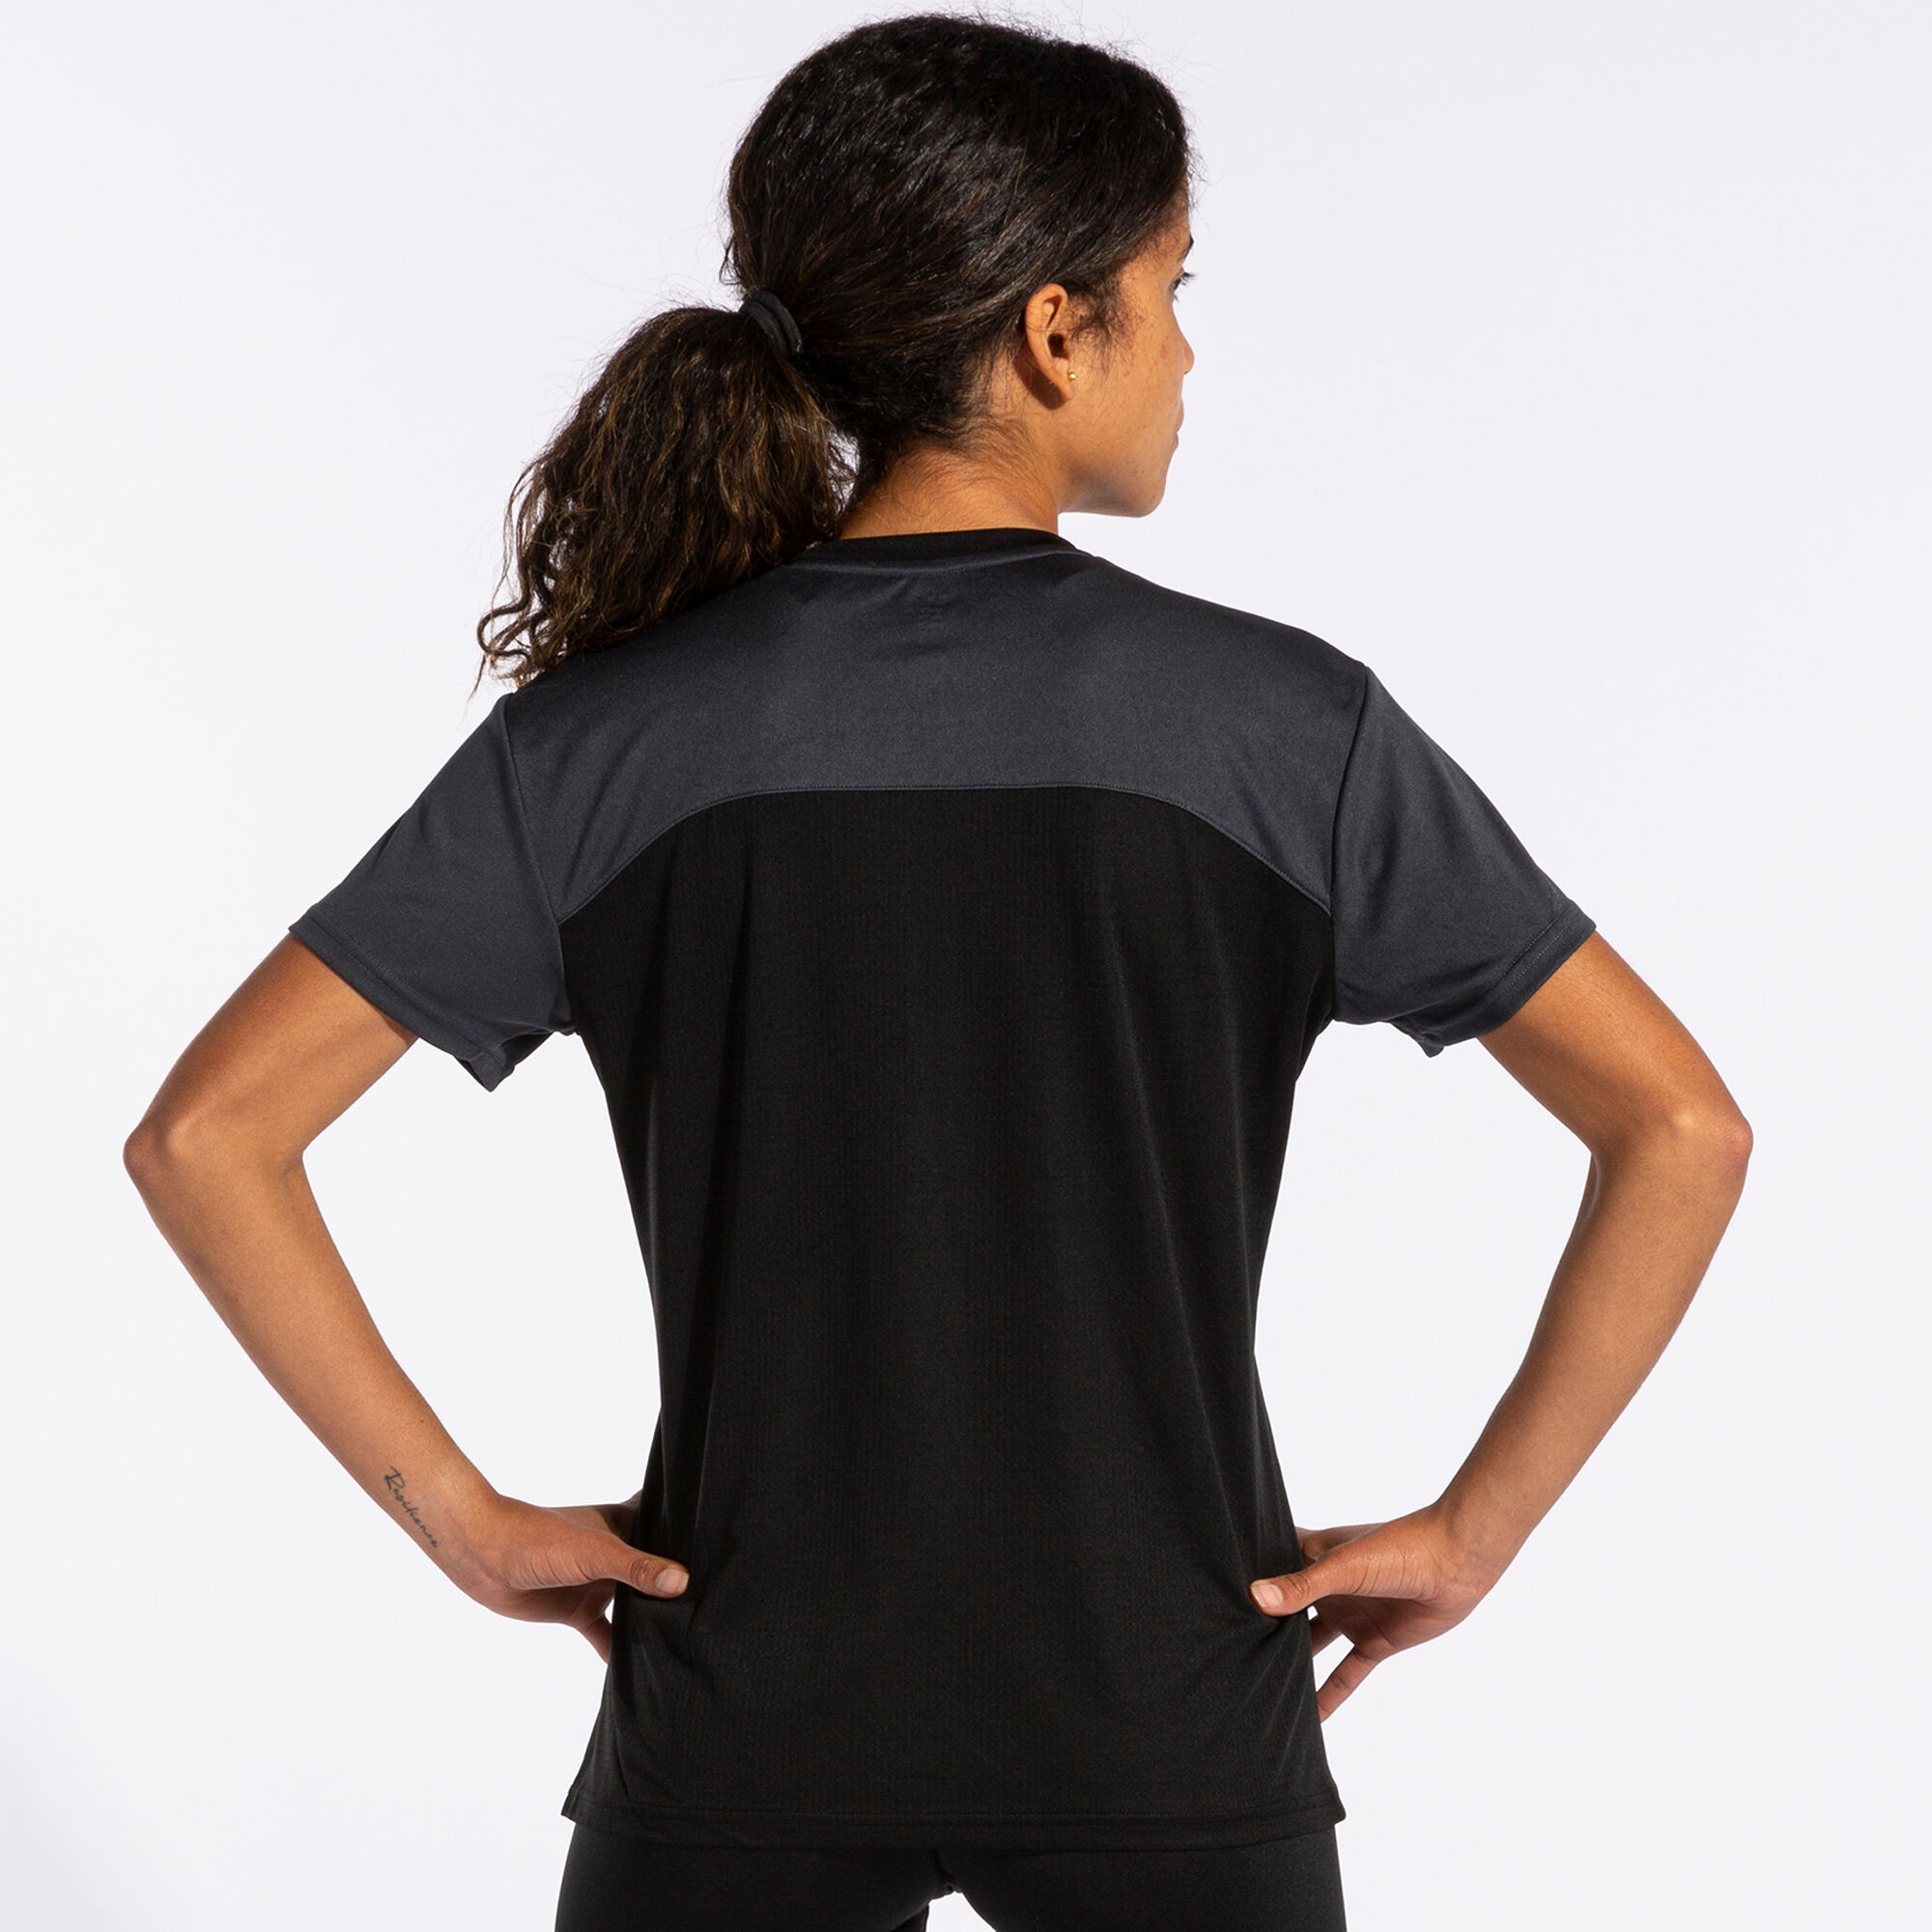 MAILLOT MANCHES COURTES FEMME WINNER II ANTHRACITE